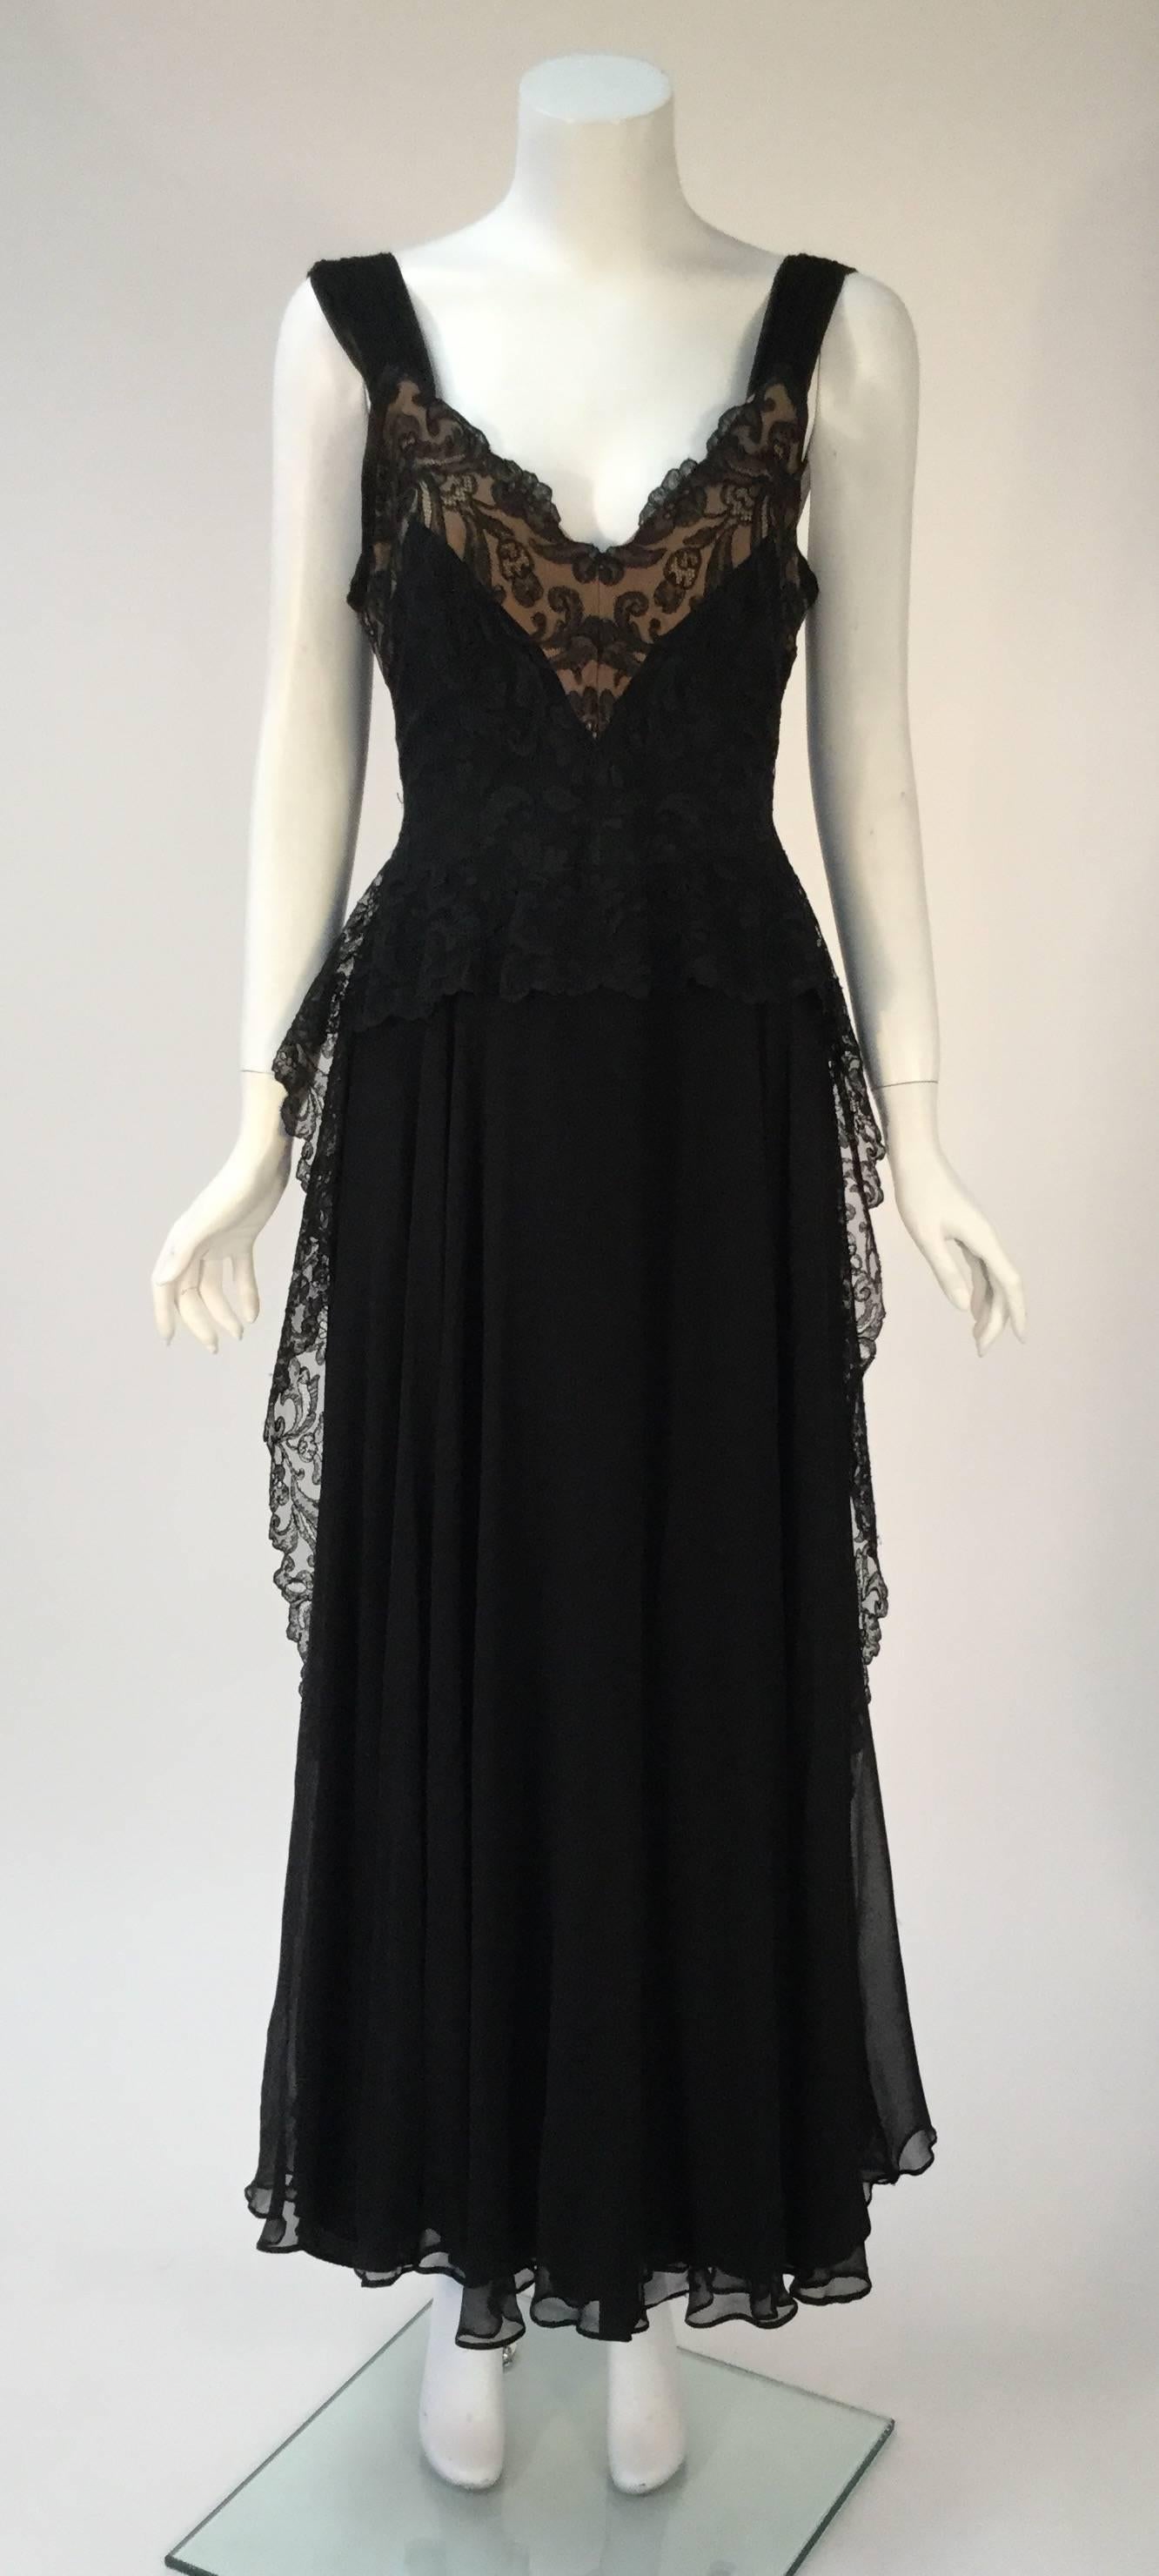 silk dress with lace overlay